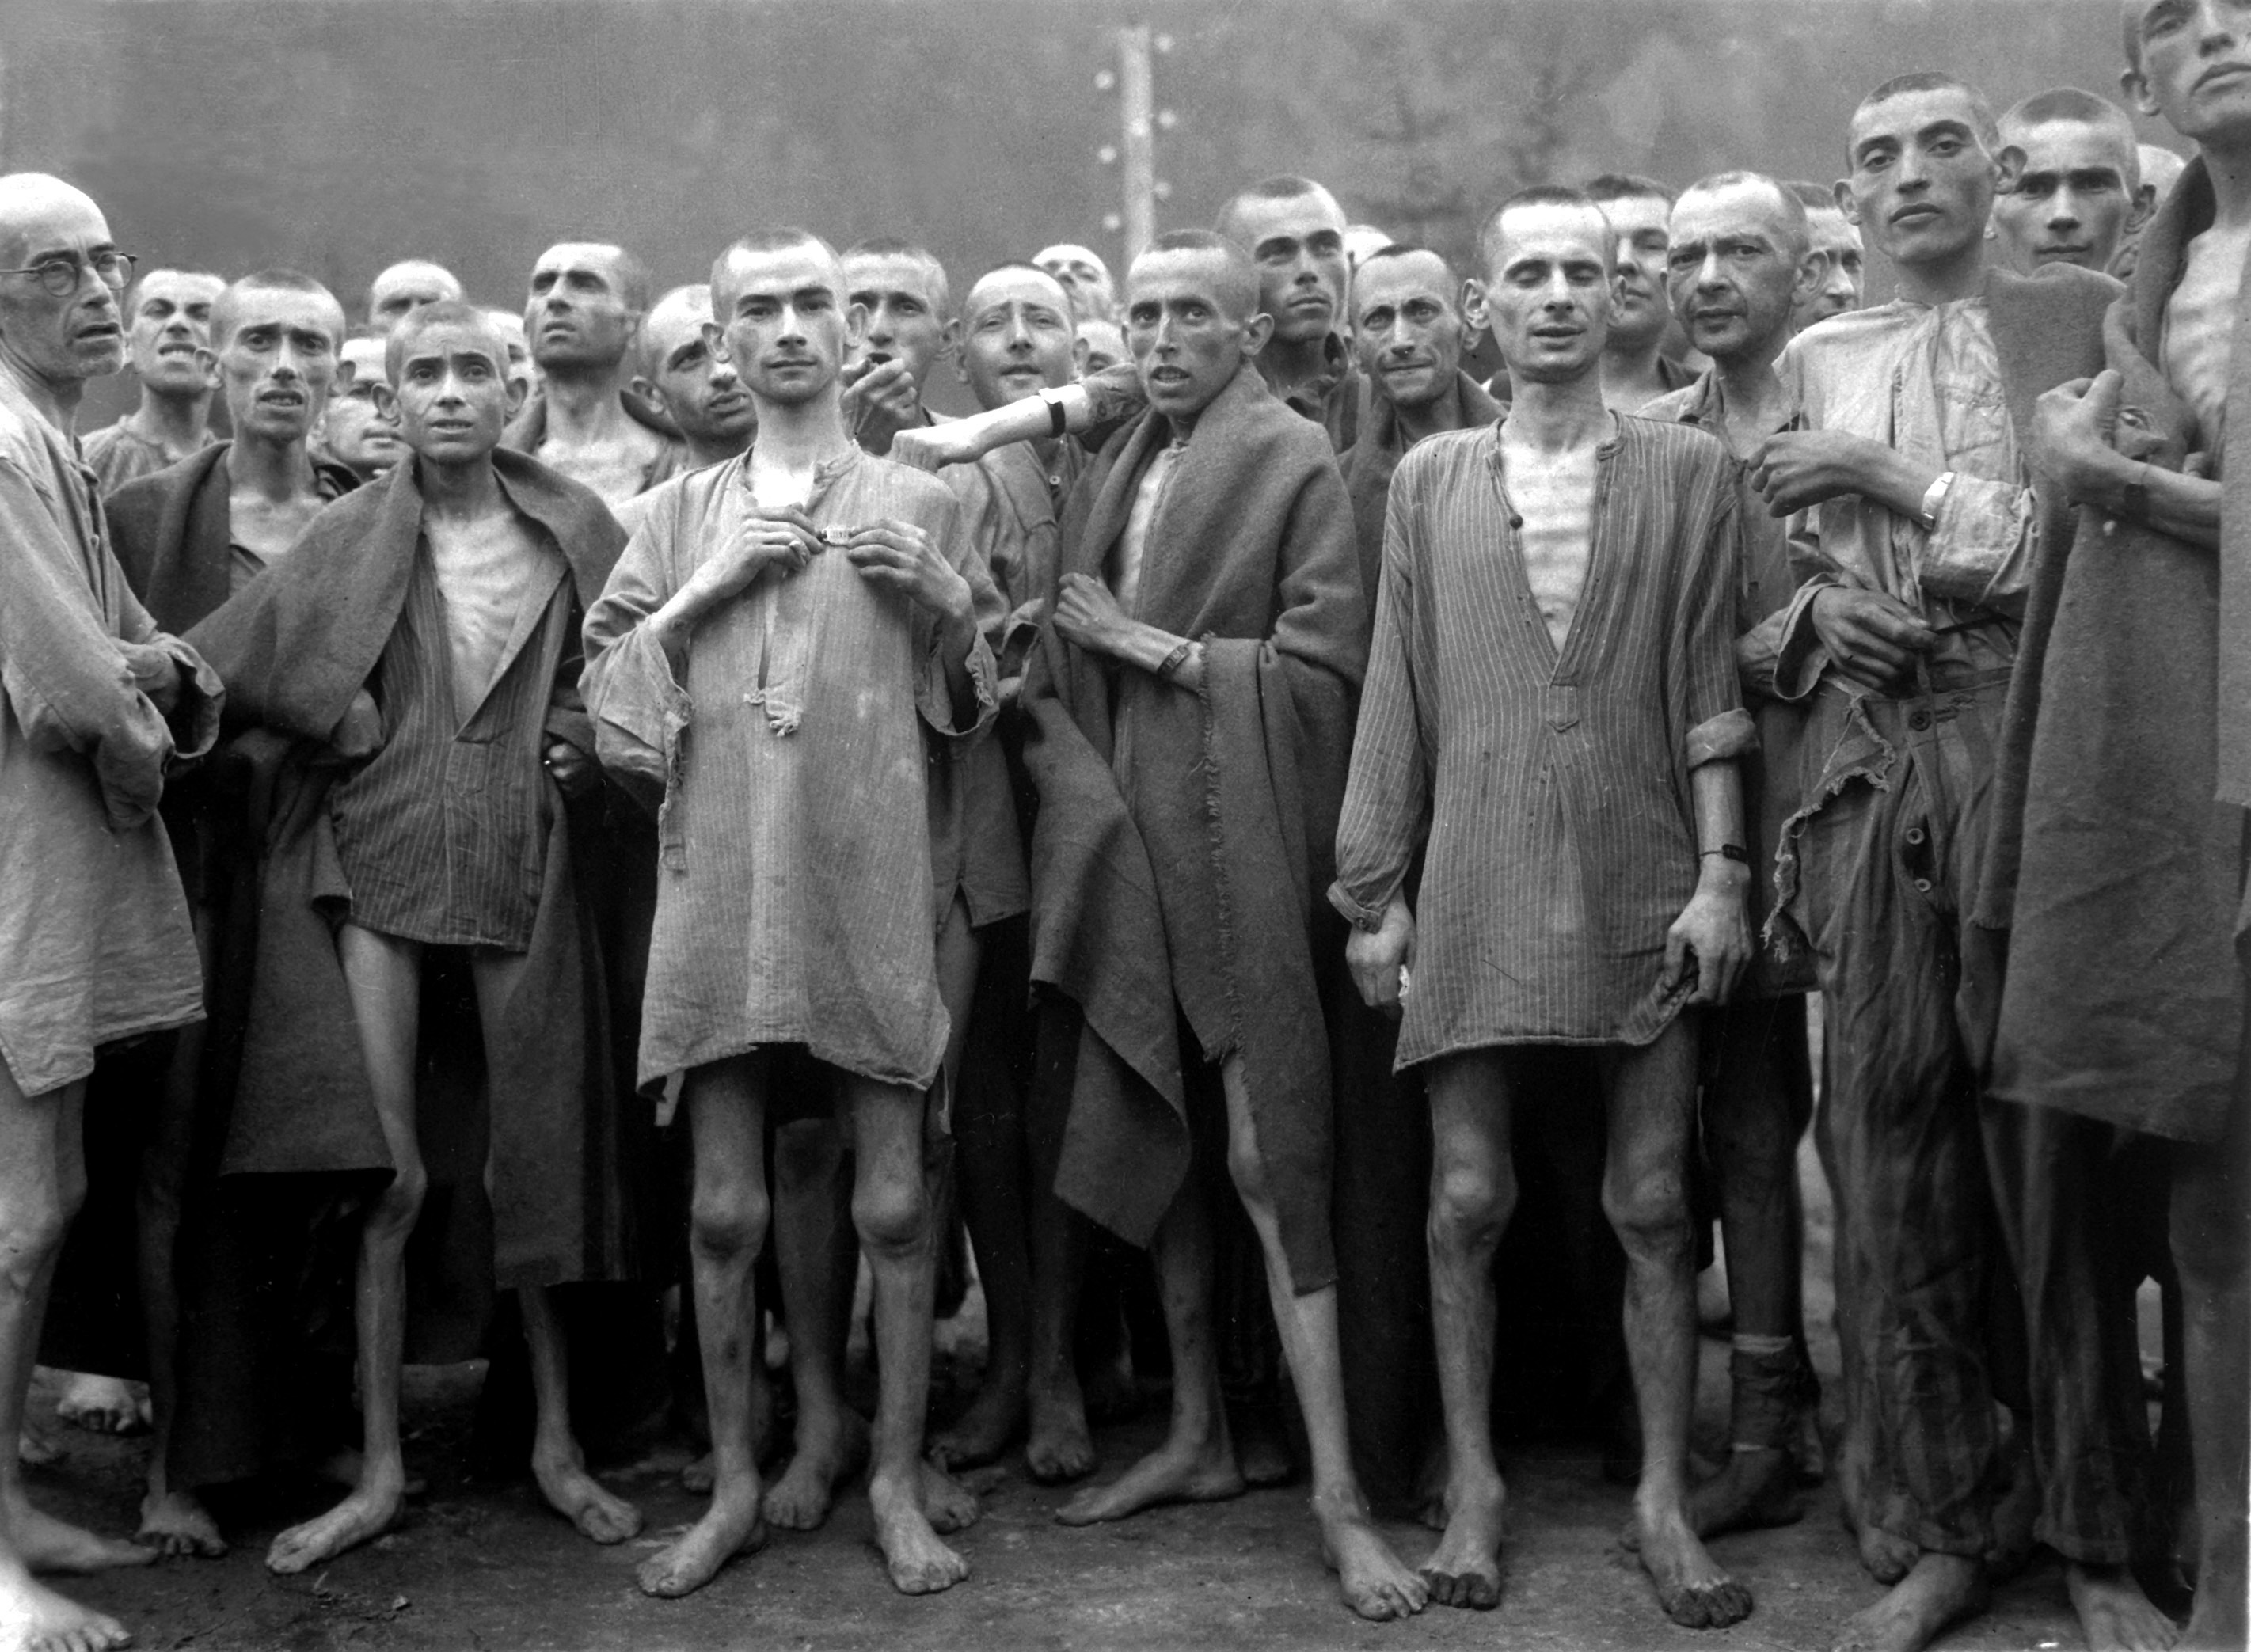 http://fr.academic.ru/pictures/frwiki/69/Ebensee_concentration_camp_prisoners_1945.jpg